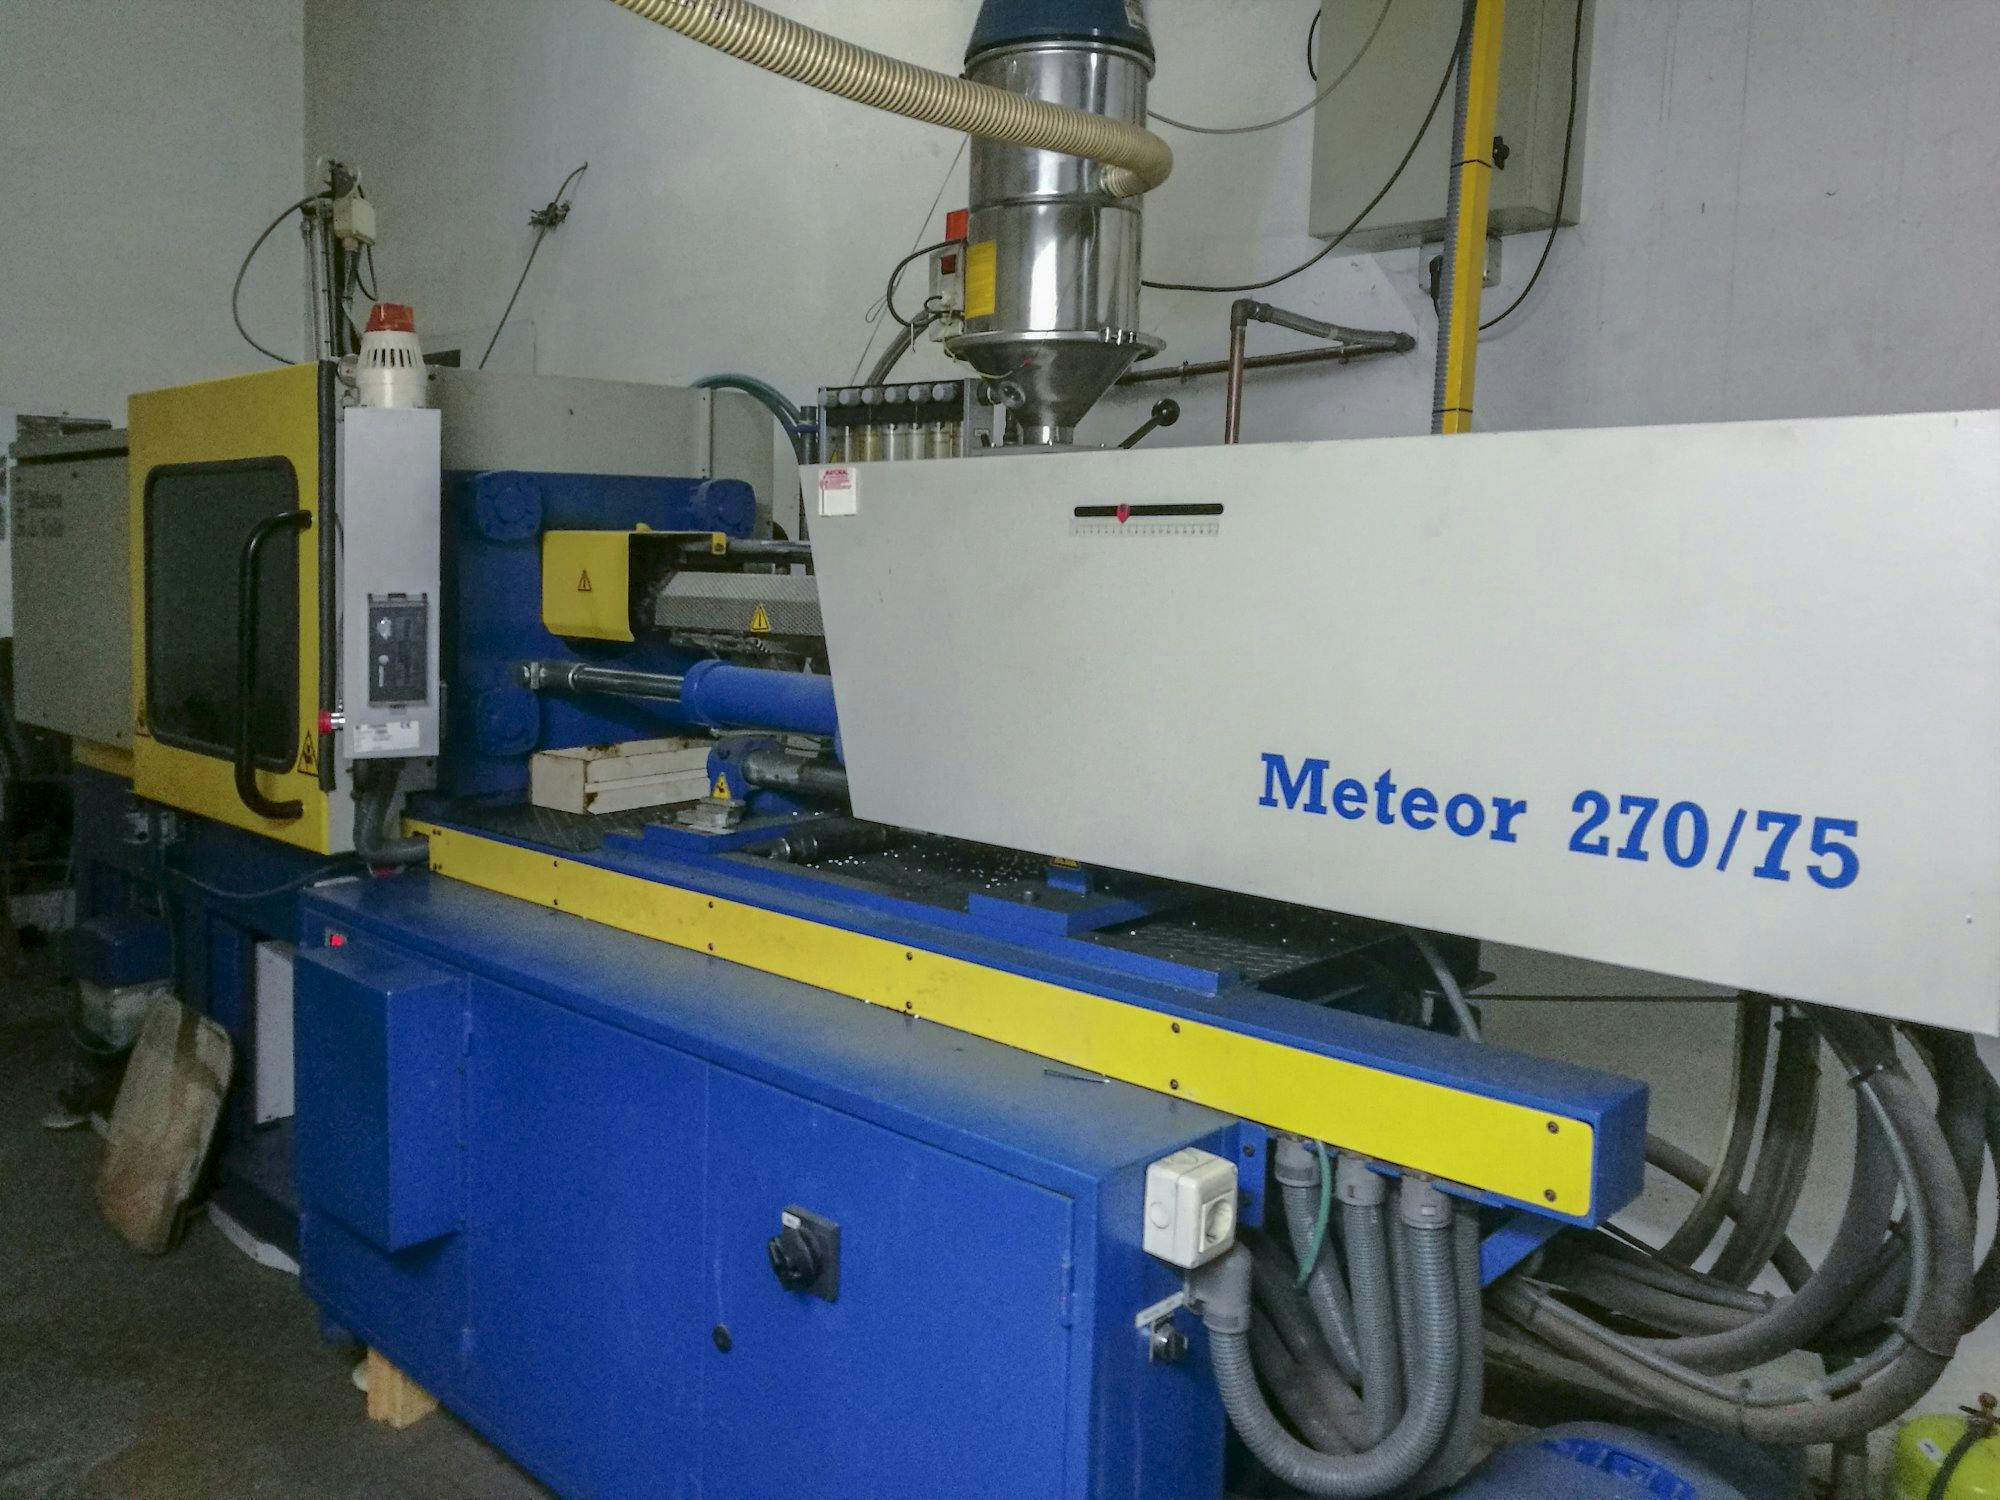 Right view 1 of Mateu & Solé Meteor 270/75 machine